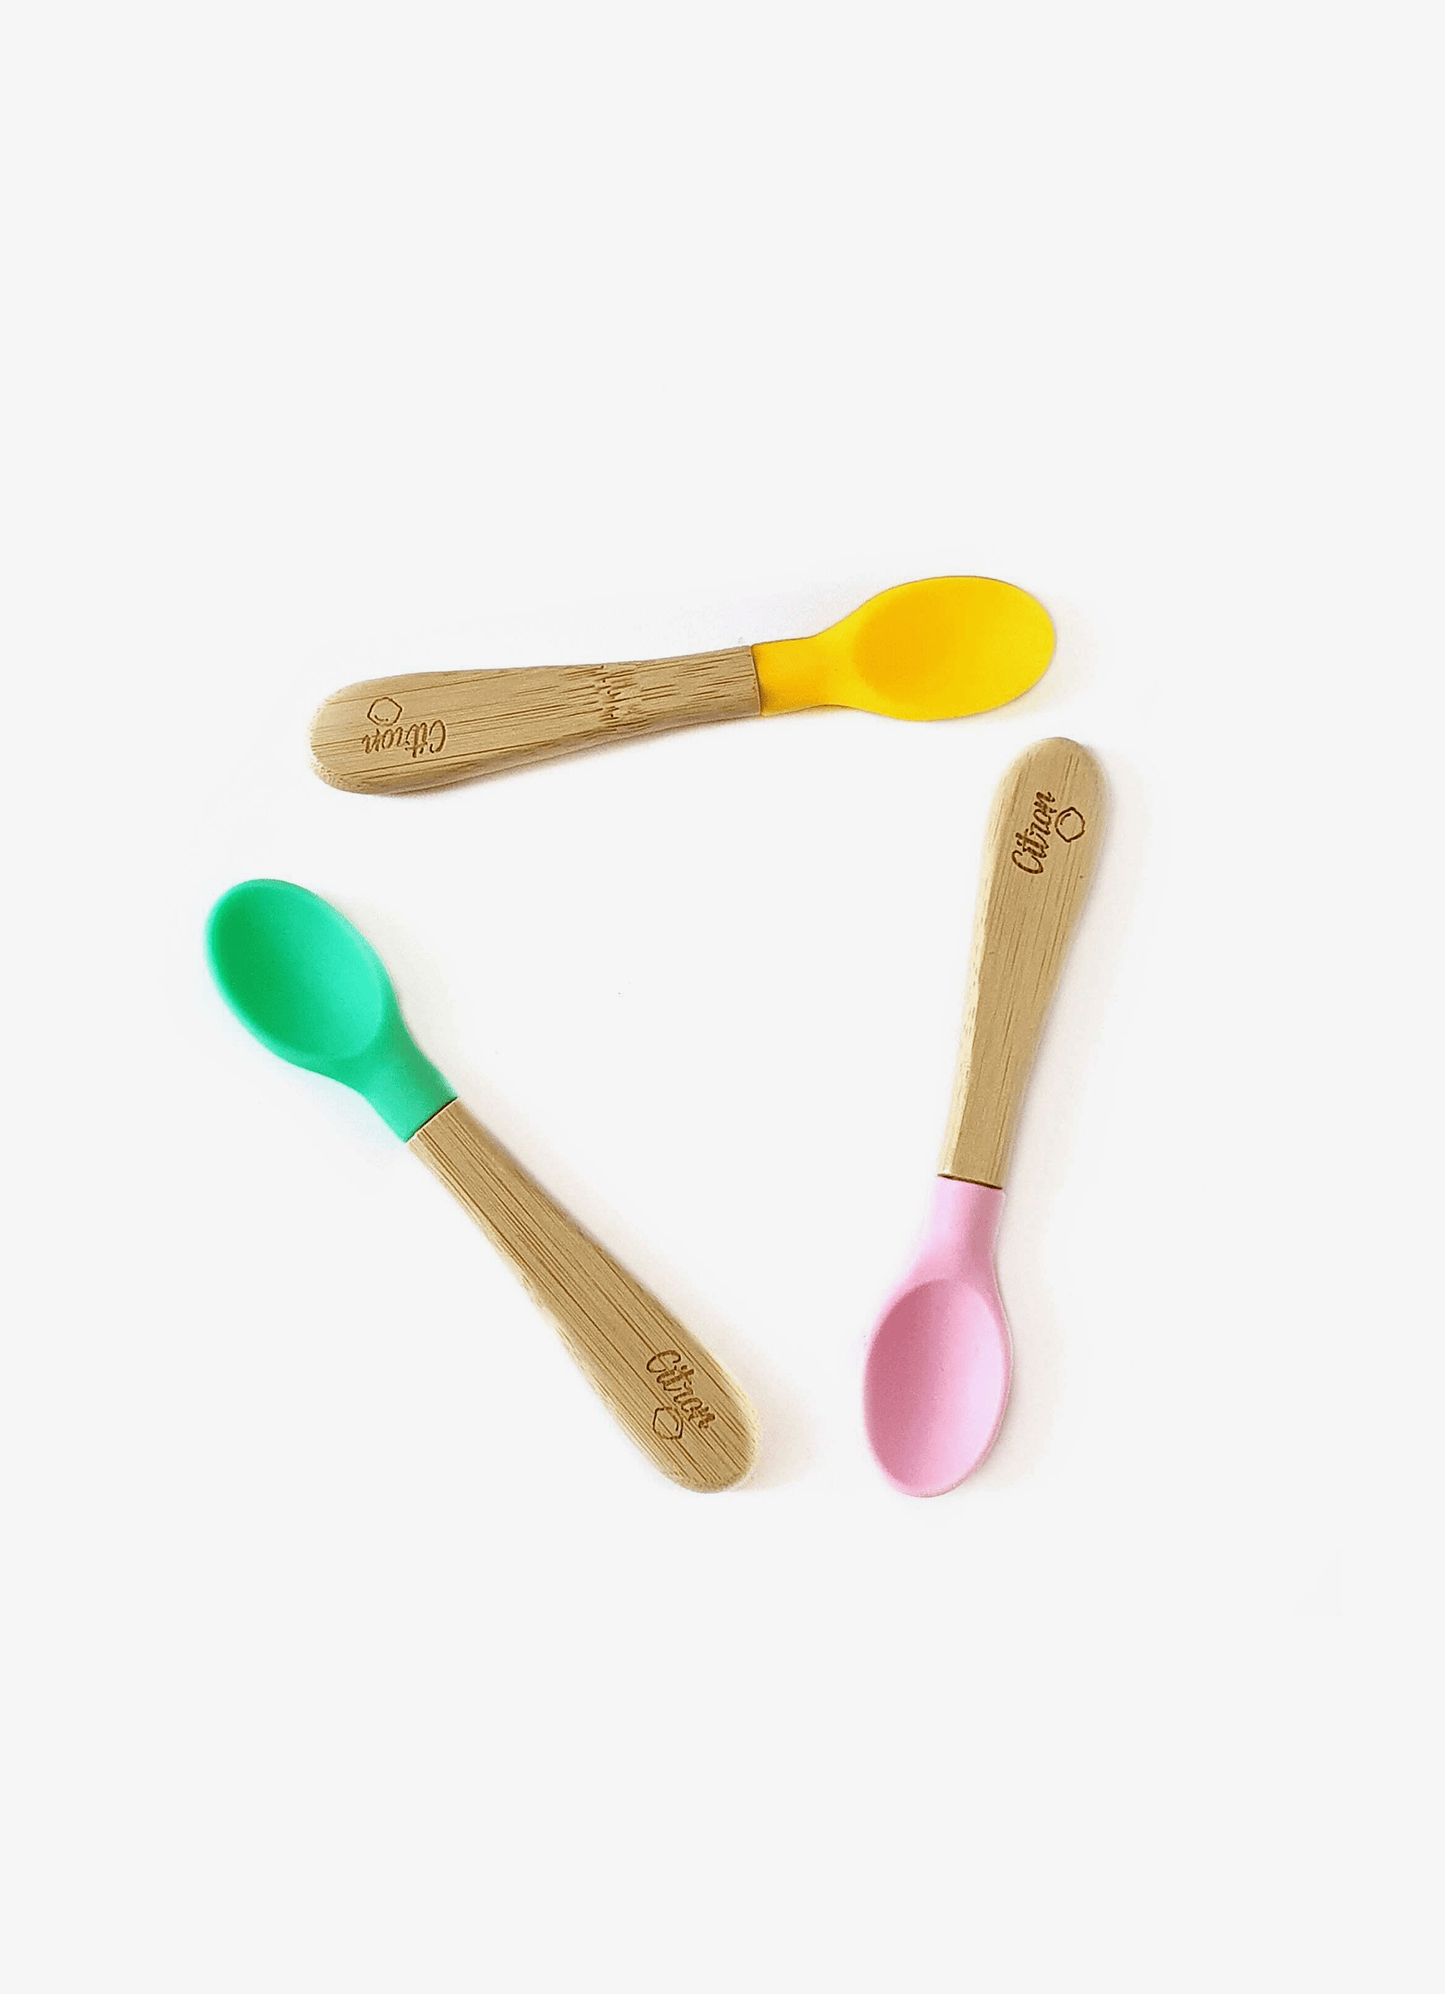 Short handled bamboo spoons - set of 2 - Pink and Yellow